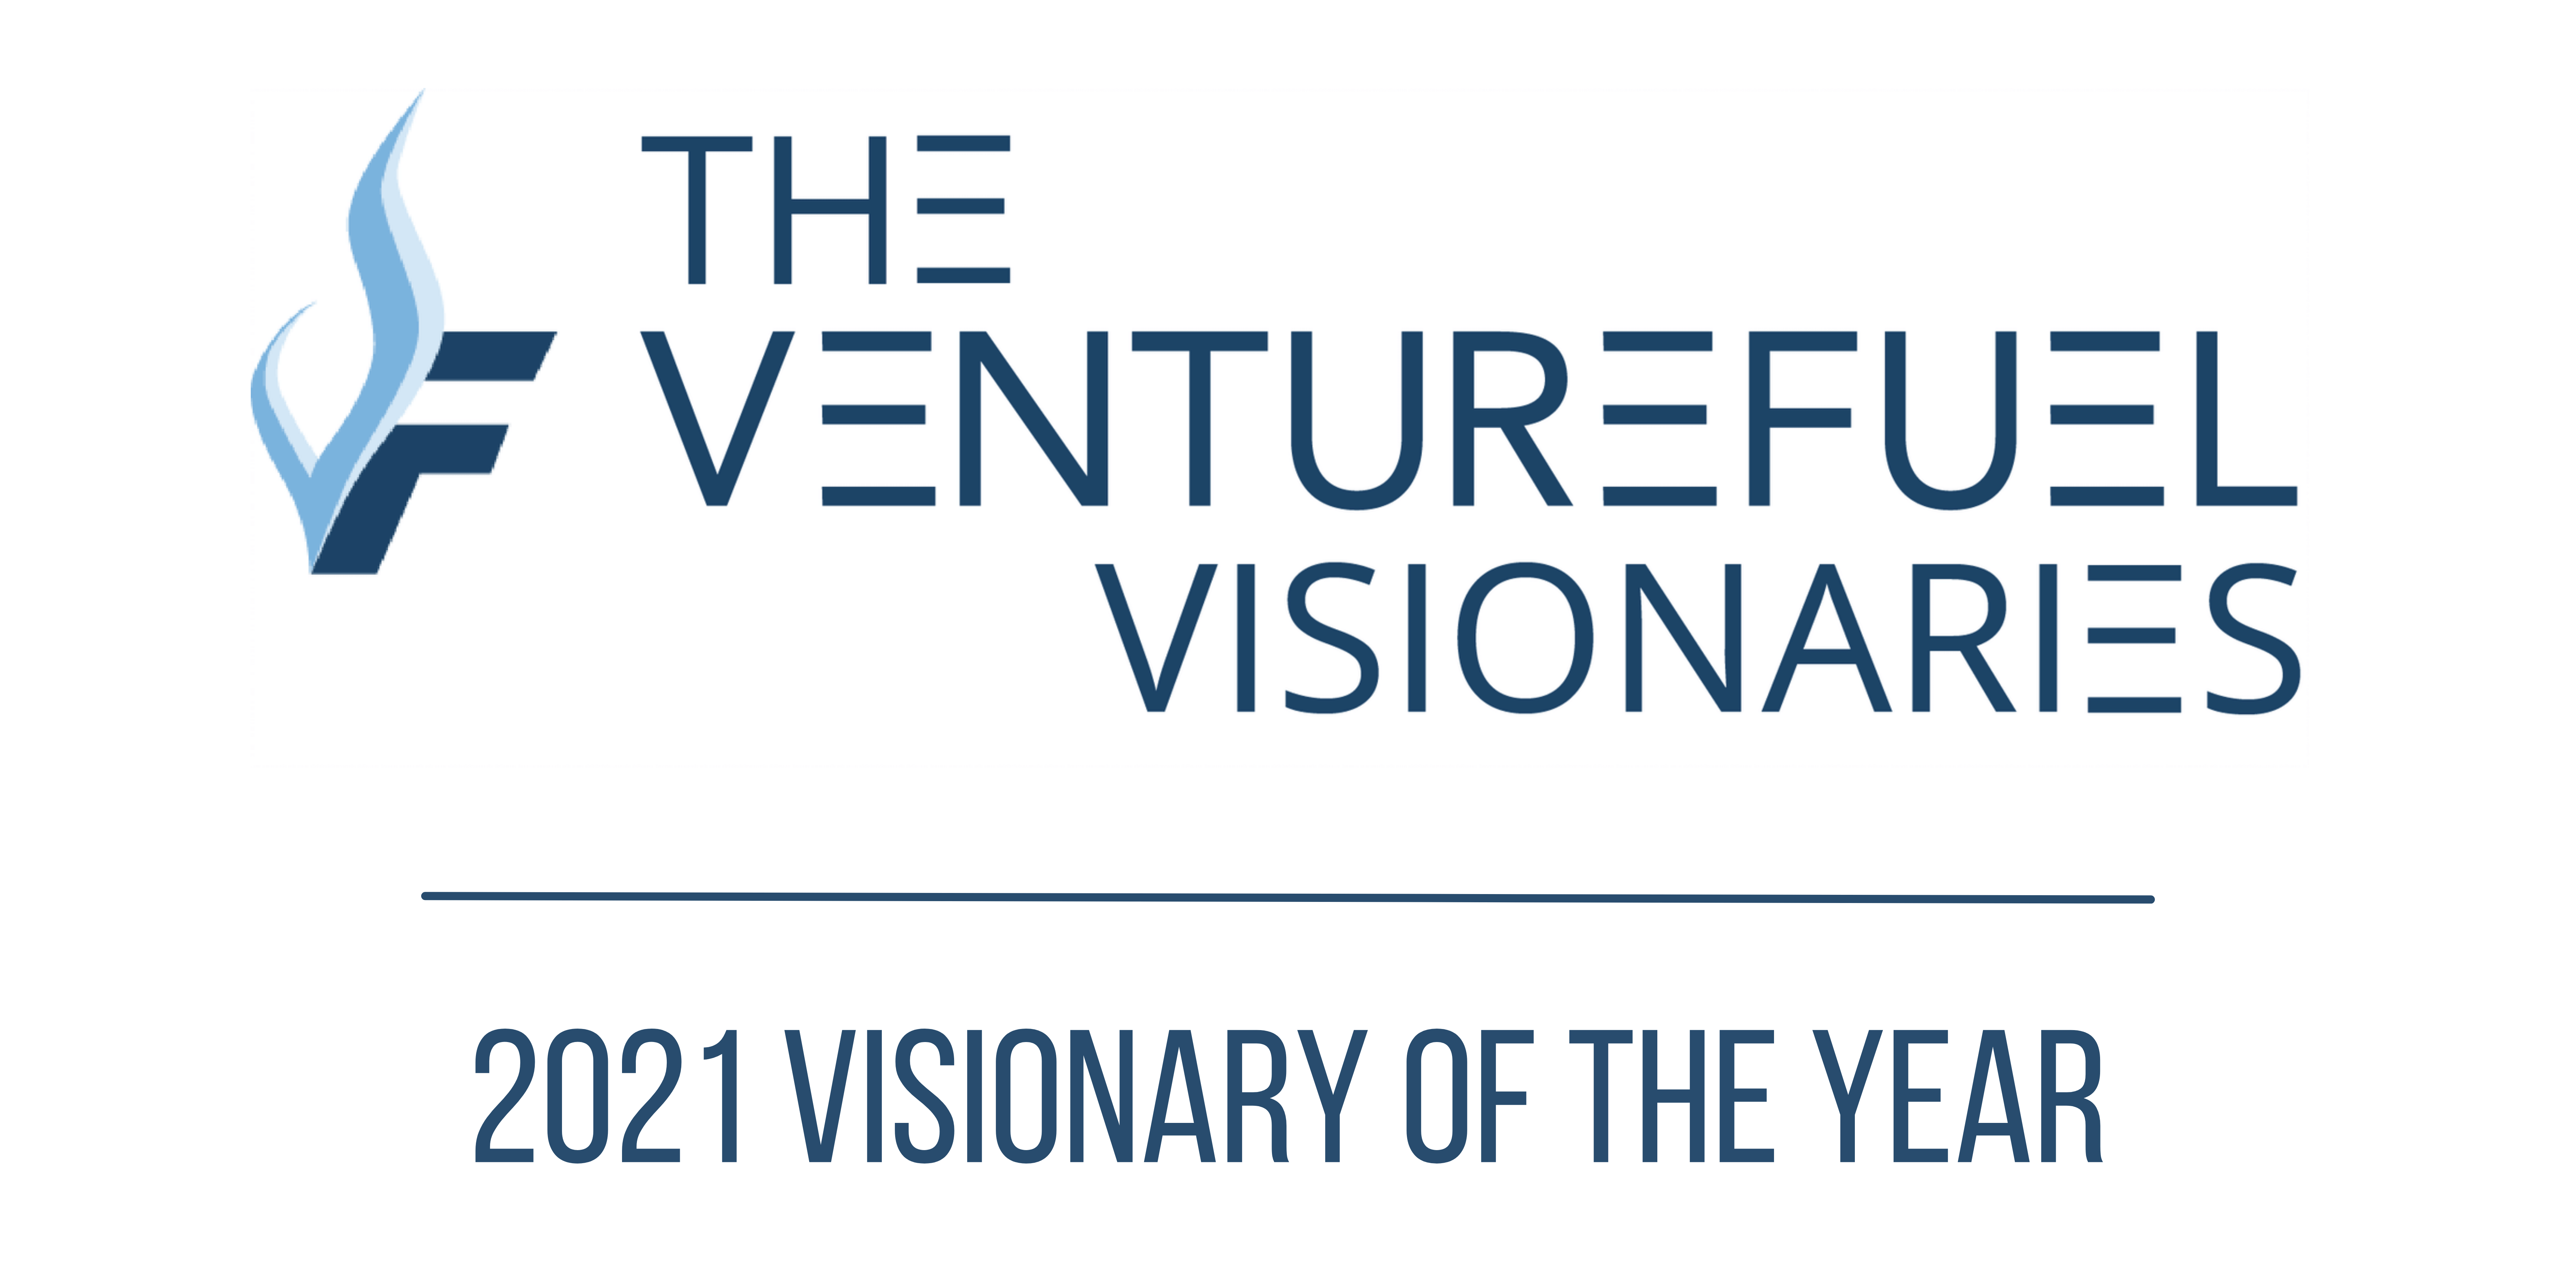 The VentureFuel Visionaries: 2021 Visionary of the Year